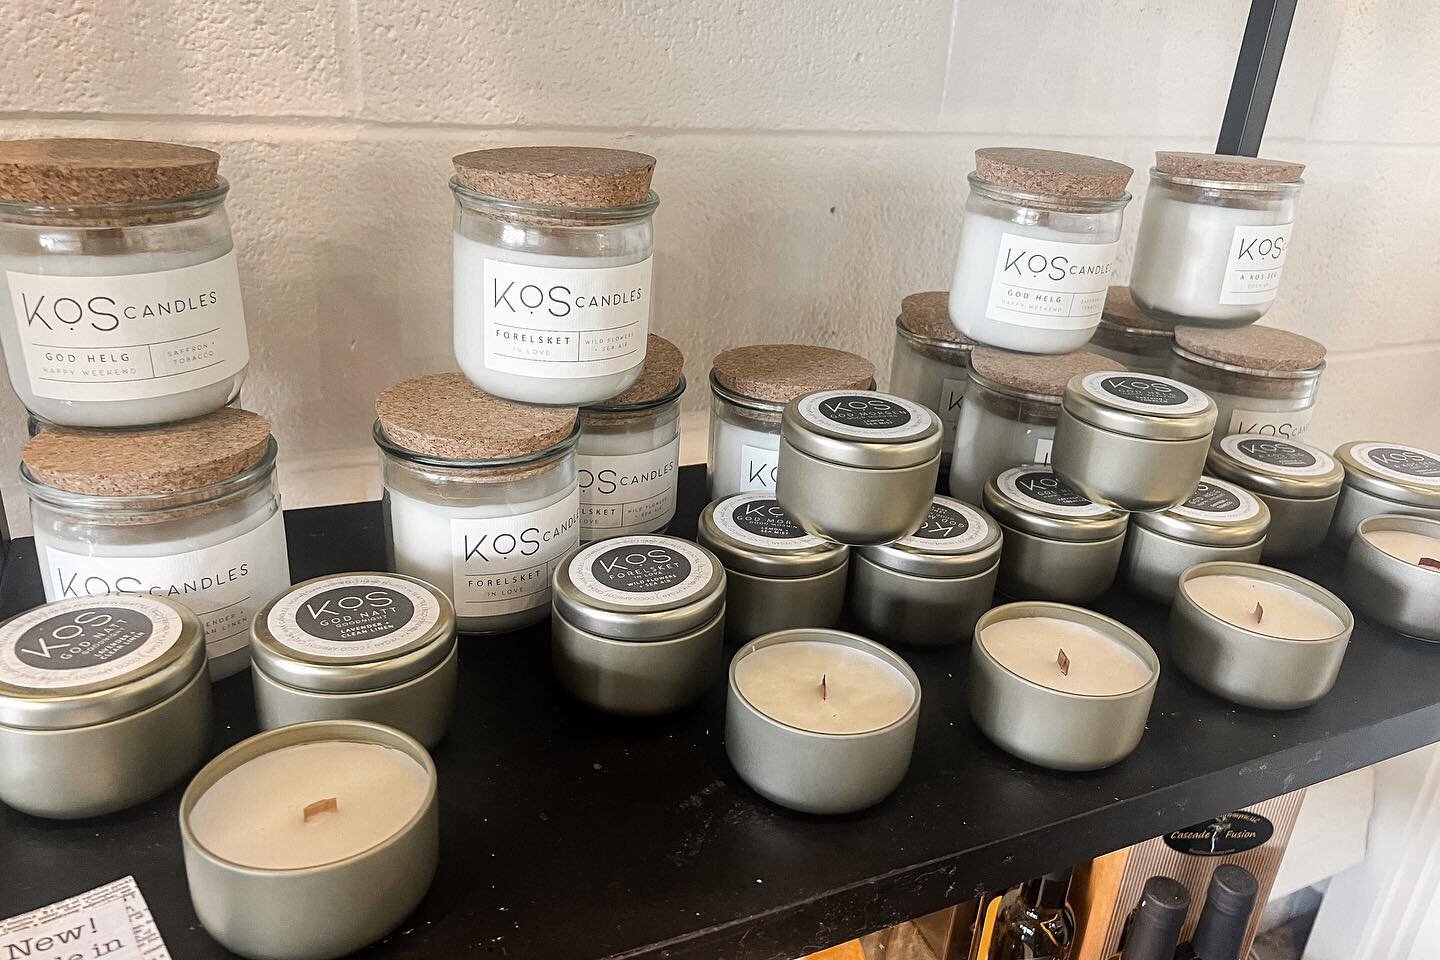 Introducing the newest place featuring Kos Candles: Crow in downtown Edmonds!

Crow is a small business supporting other small businesses. They carry an amazing collection of local art, handmade jewelry, and unique gift items. They even have a replic